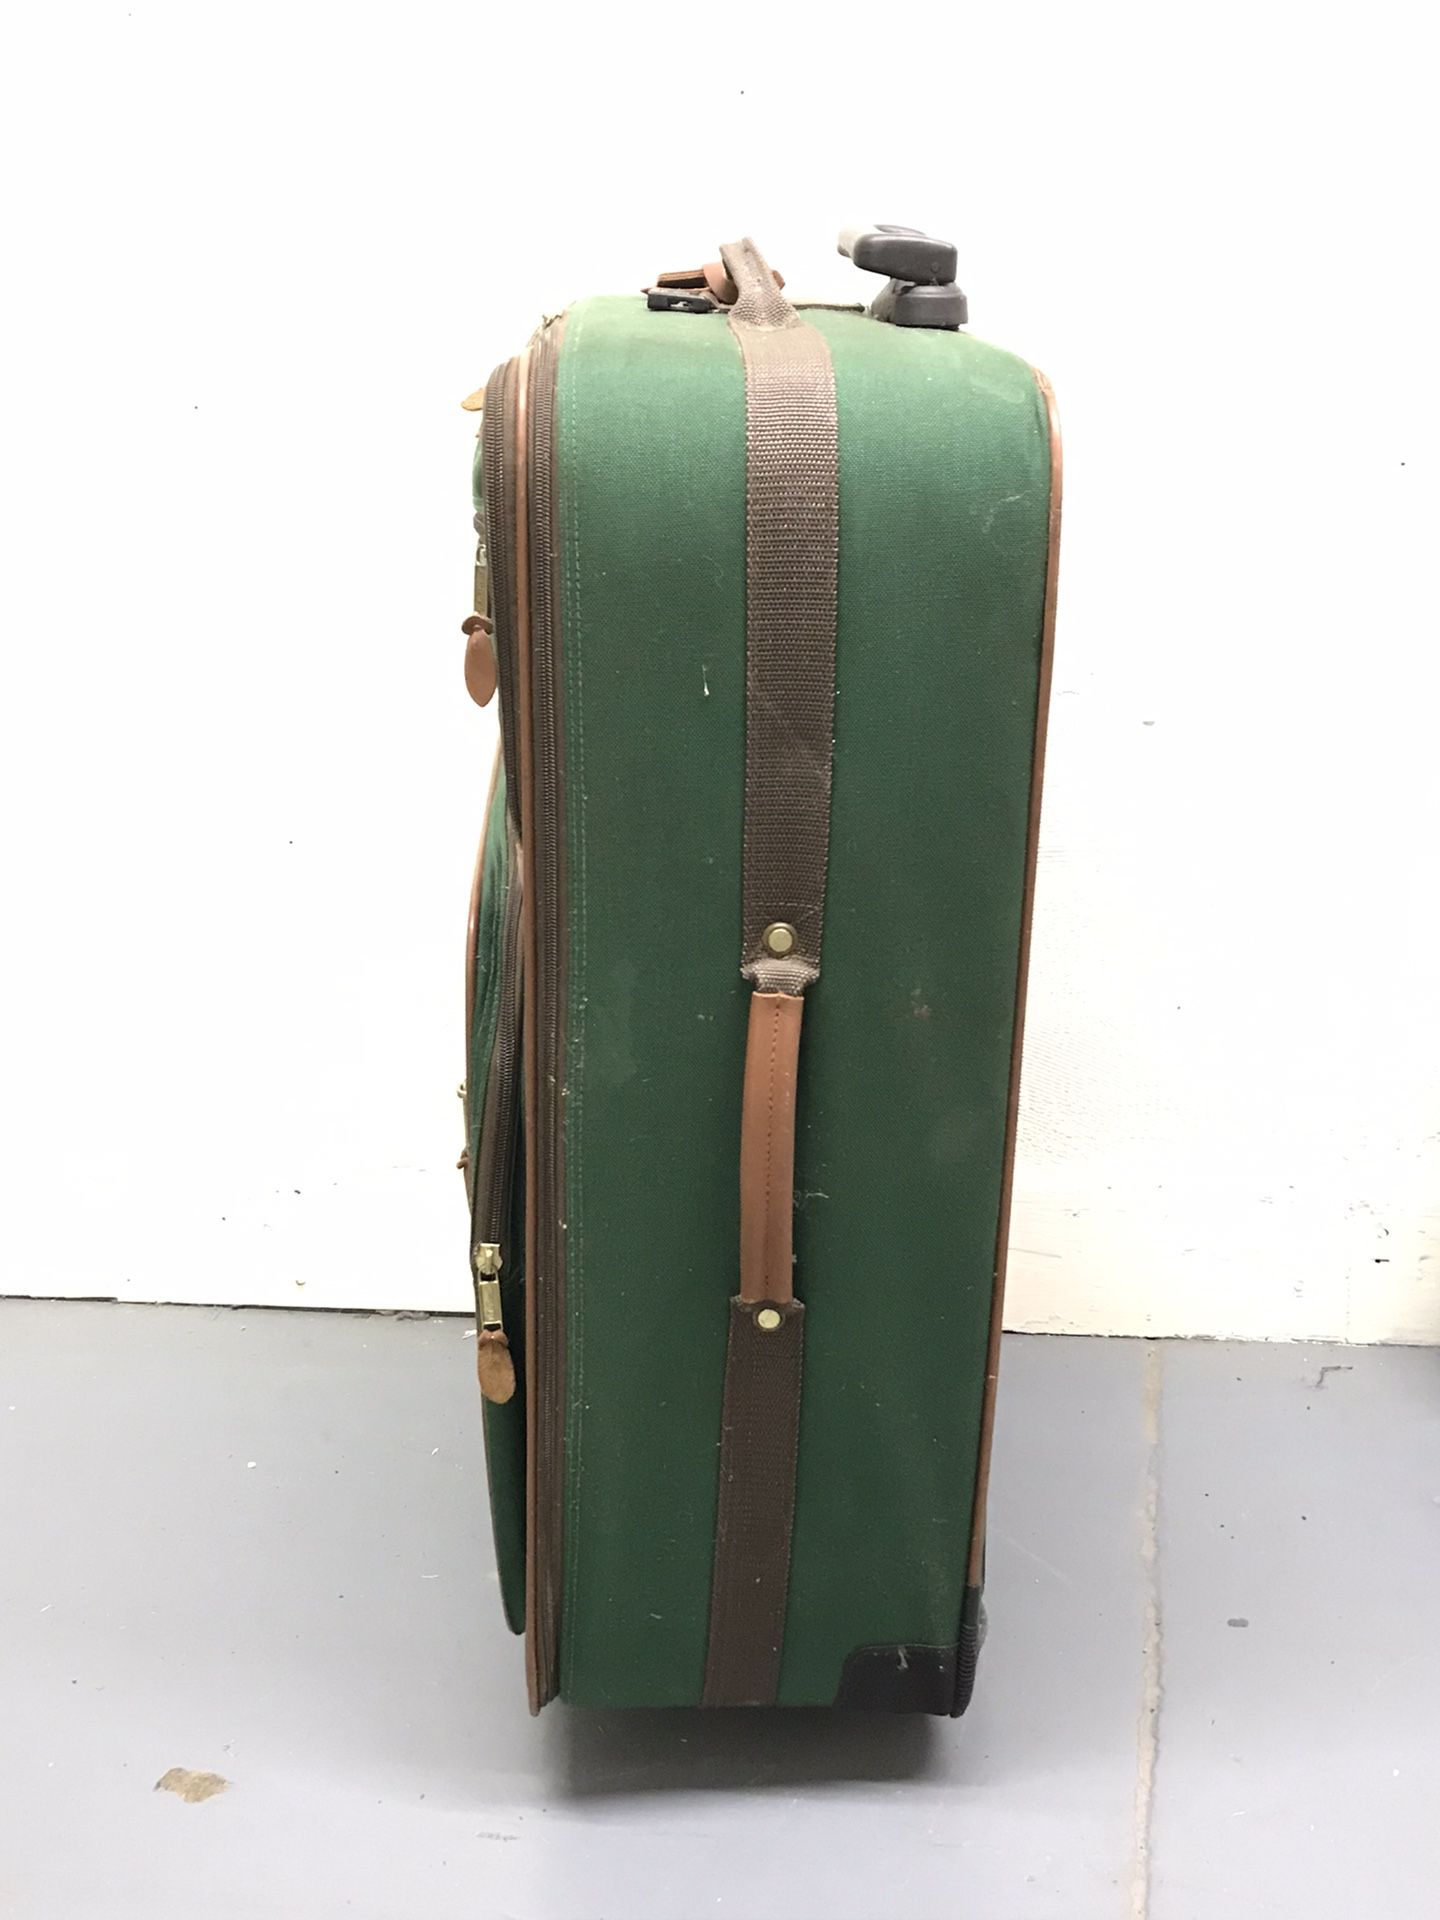 Travel Hanging Garment Bag for Sale in Alhambra, CA - OfferUp